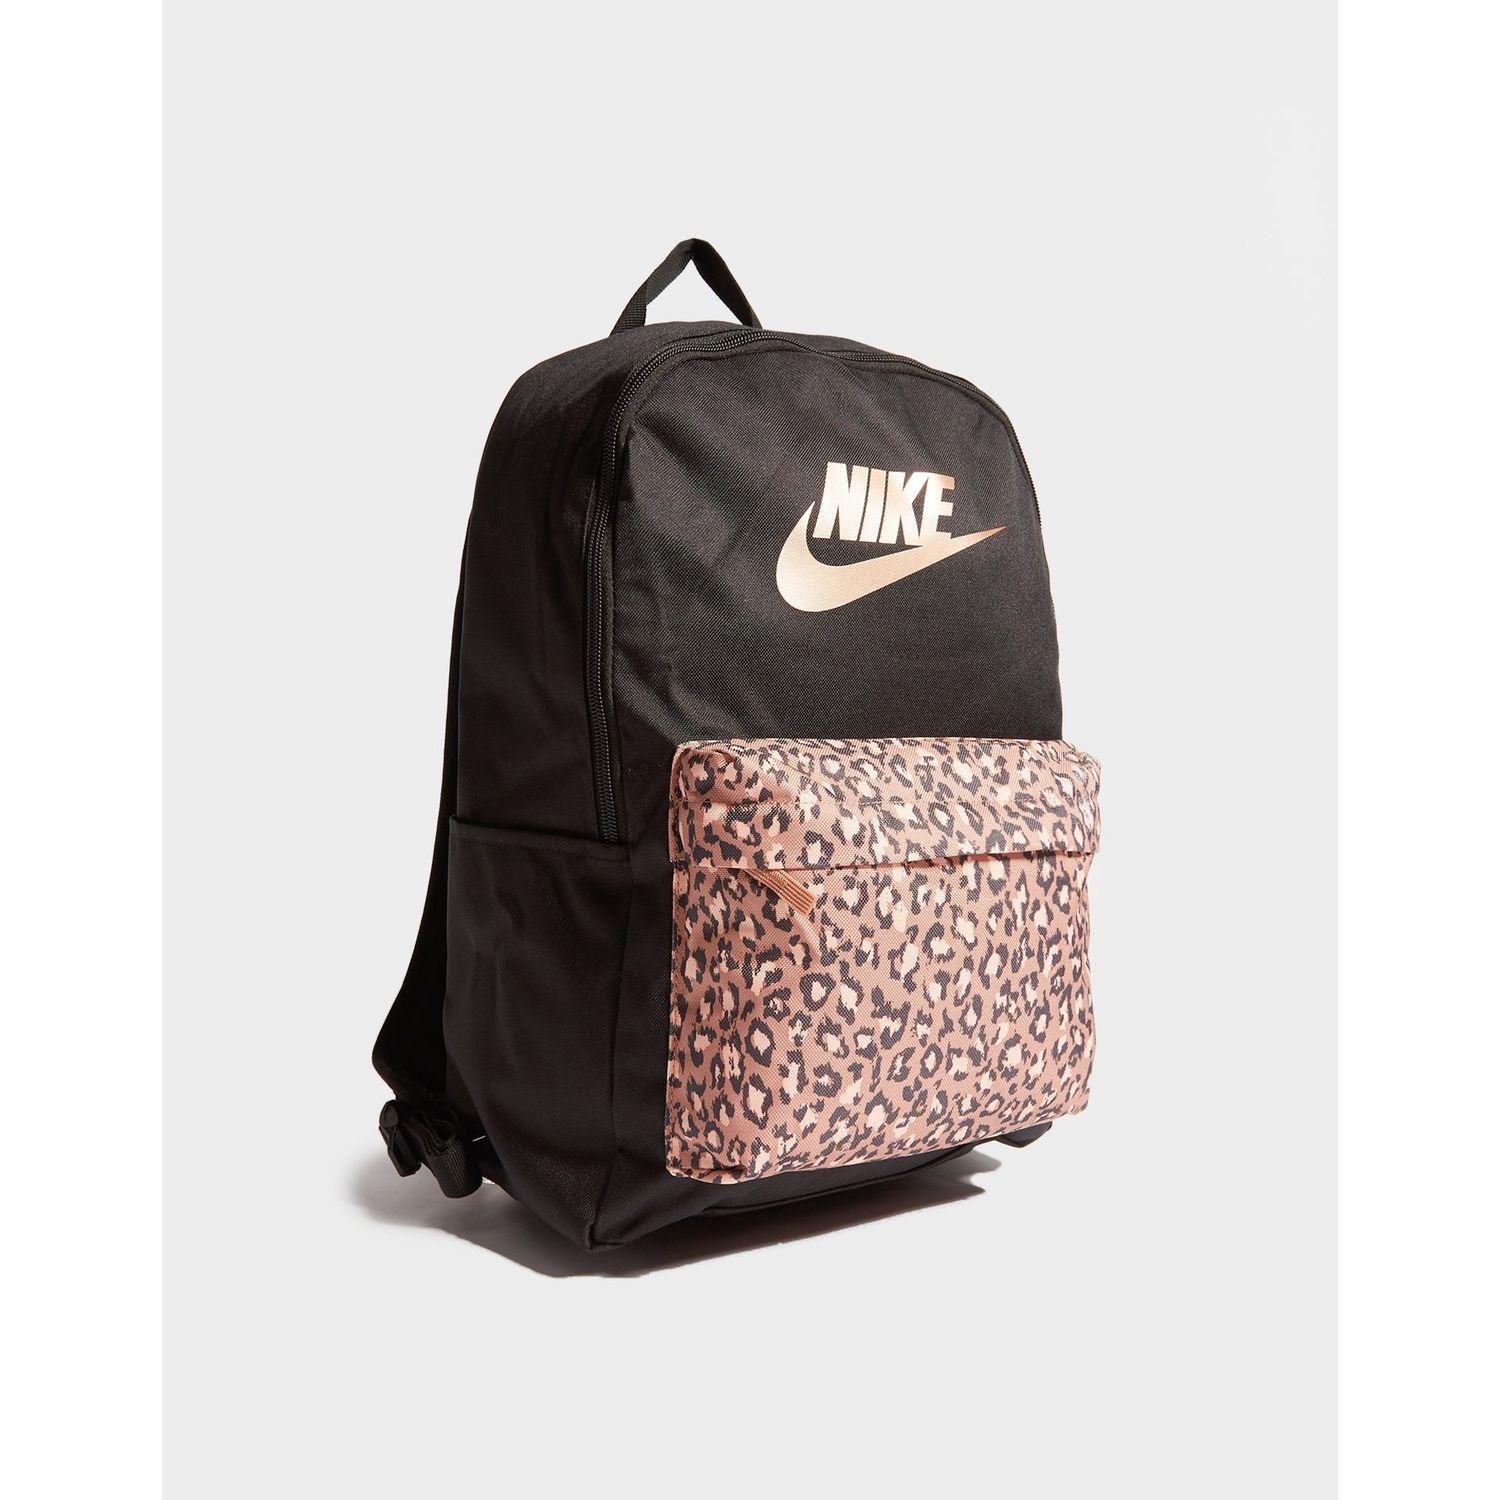 Nike Synthetic Heritage Backpack in Black/Rose Gold (Black) - Lyst